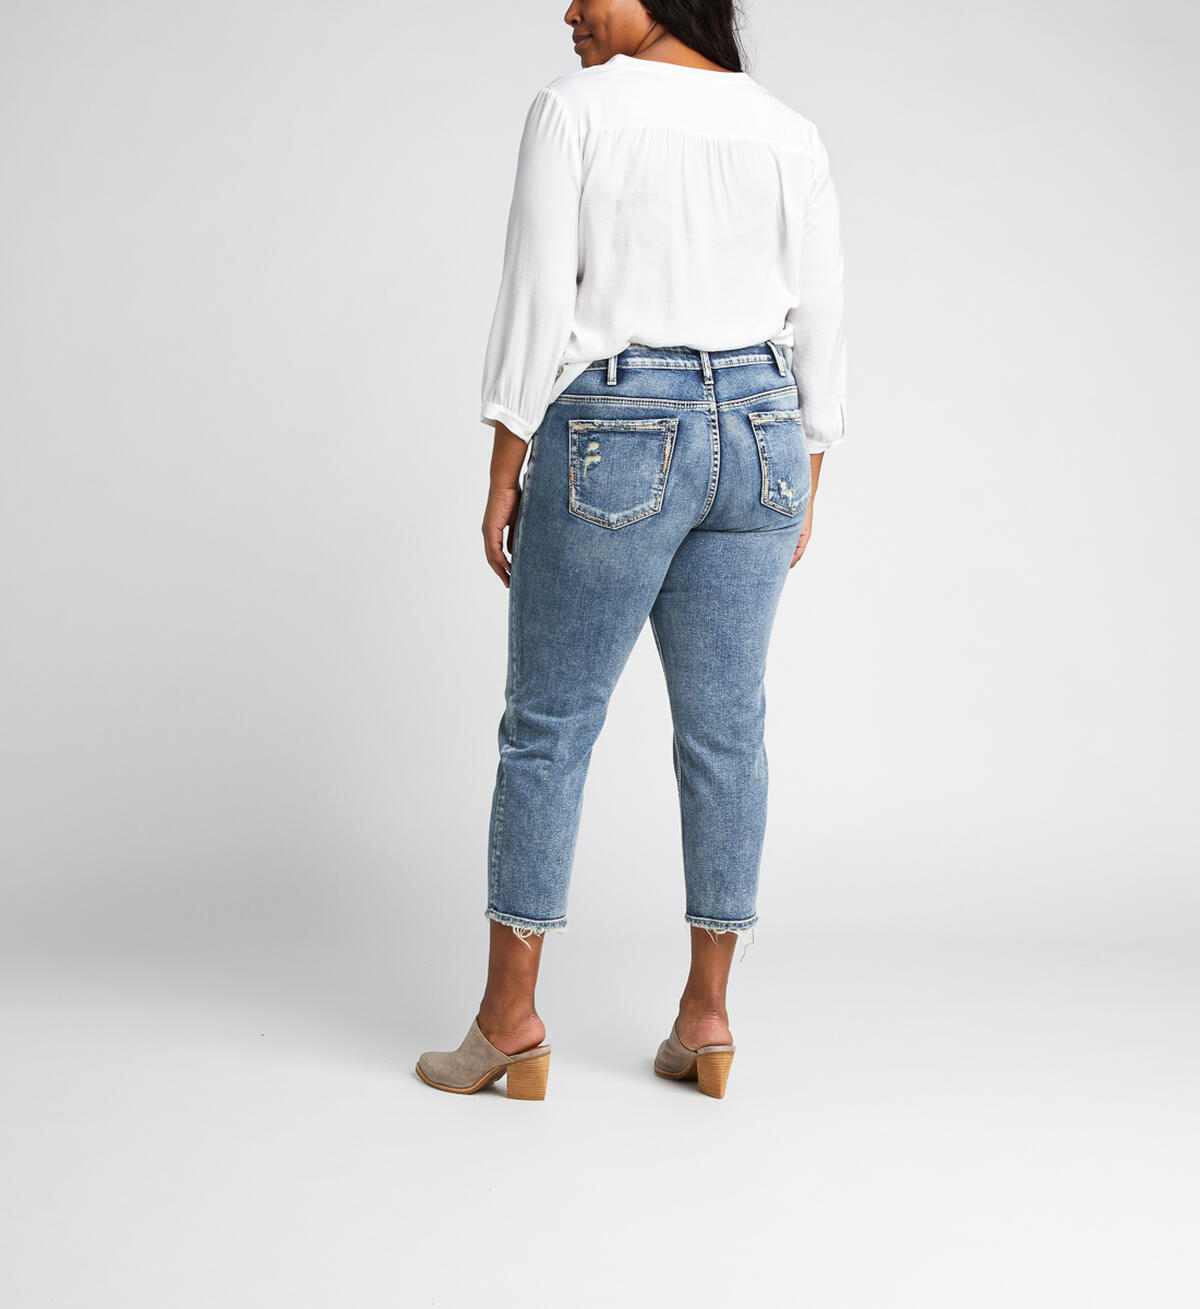 Elyse Mid-Rise Curvy Relaxed Slim Crop Jeans, , hi-res image number 1